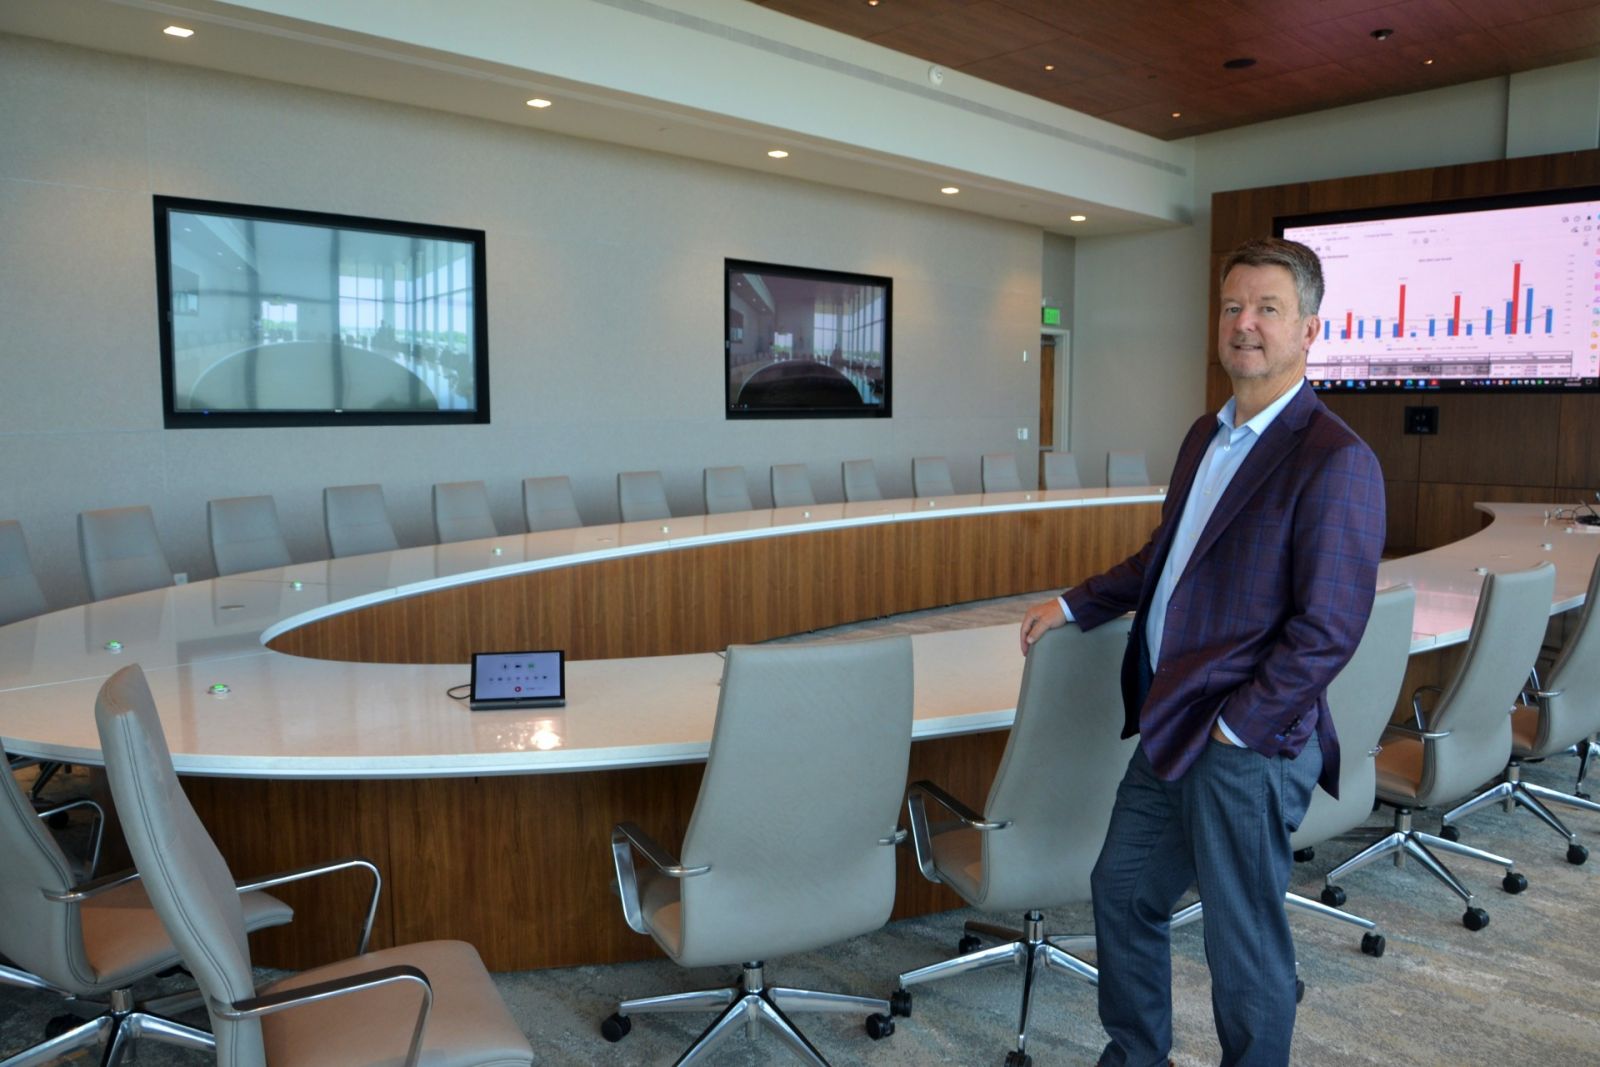 Southern First CEO Art Seaver checks out the bank's new board room, which came together just hours before the first directors' meeting in the new building. (Photo/Ross Norton)